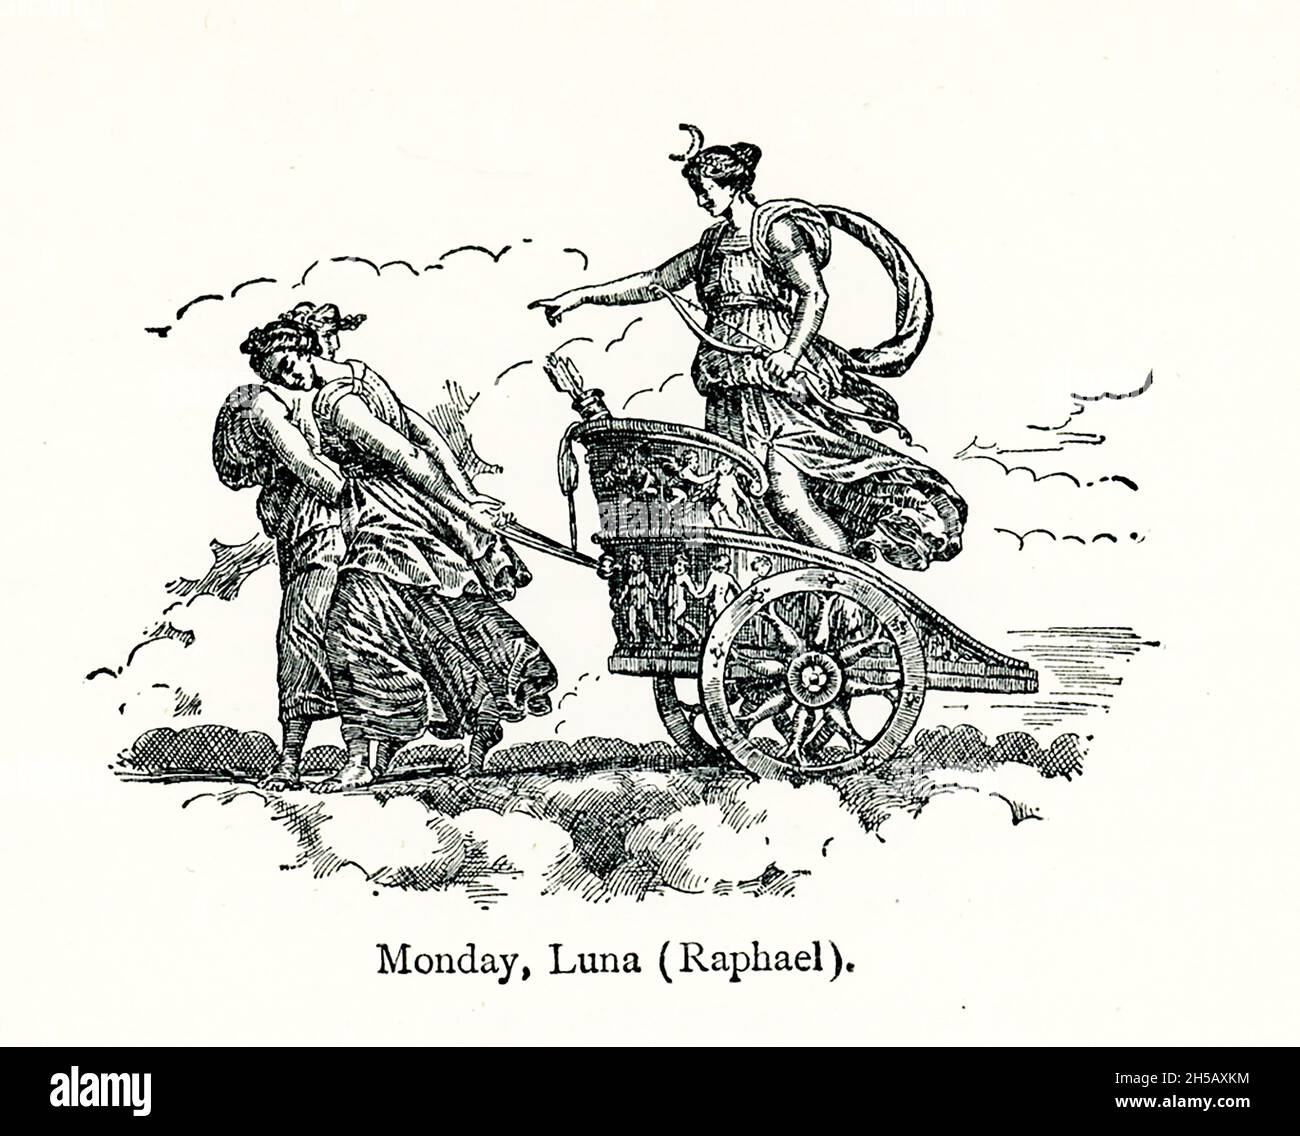 This illustration shows the roman moon goddess Luna in her chariot being pulled by two women. It dates to 1695, an engraving by Lasinio, patterned after a roundel in the ceiling painting (based on drawings by Raphael) of the Sala Borgia in the Vatican that is based on drawings in 1516 by the Italian artist Raphael. Stock Photo